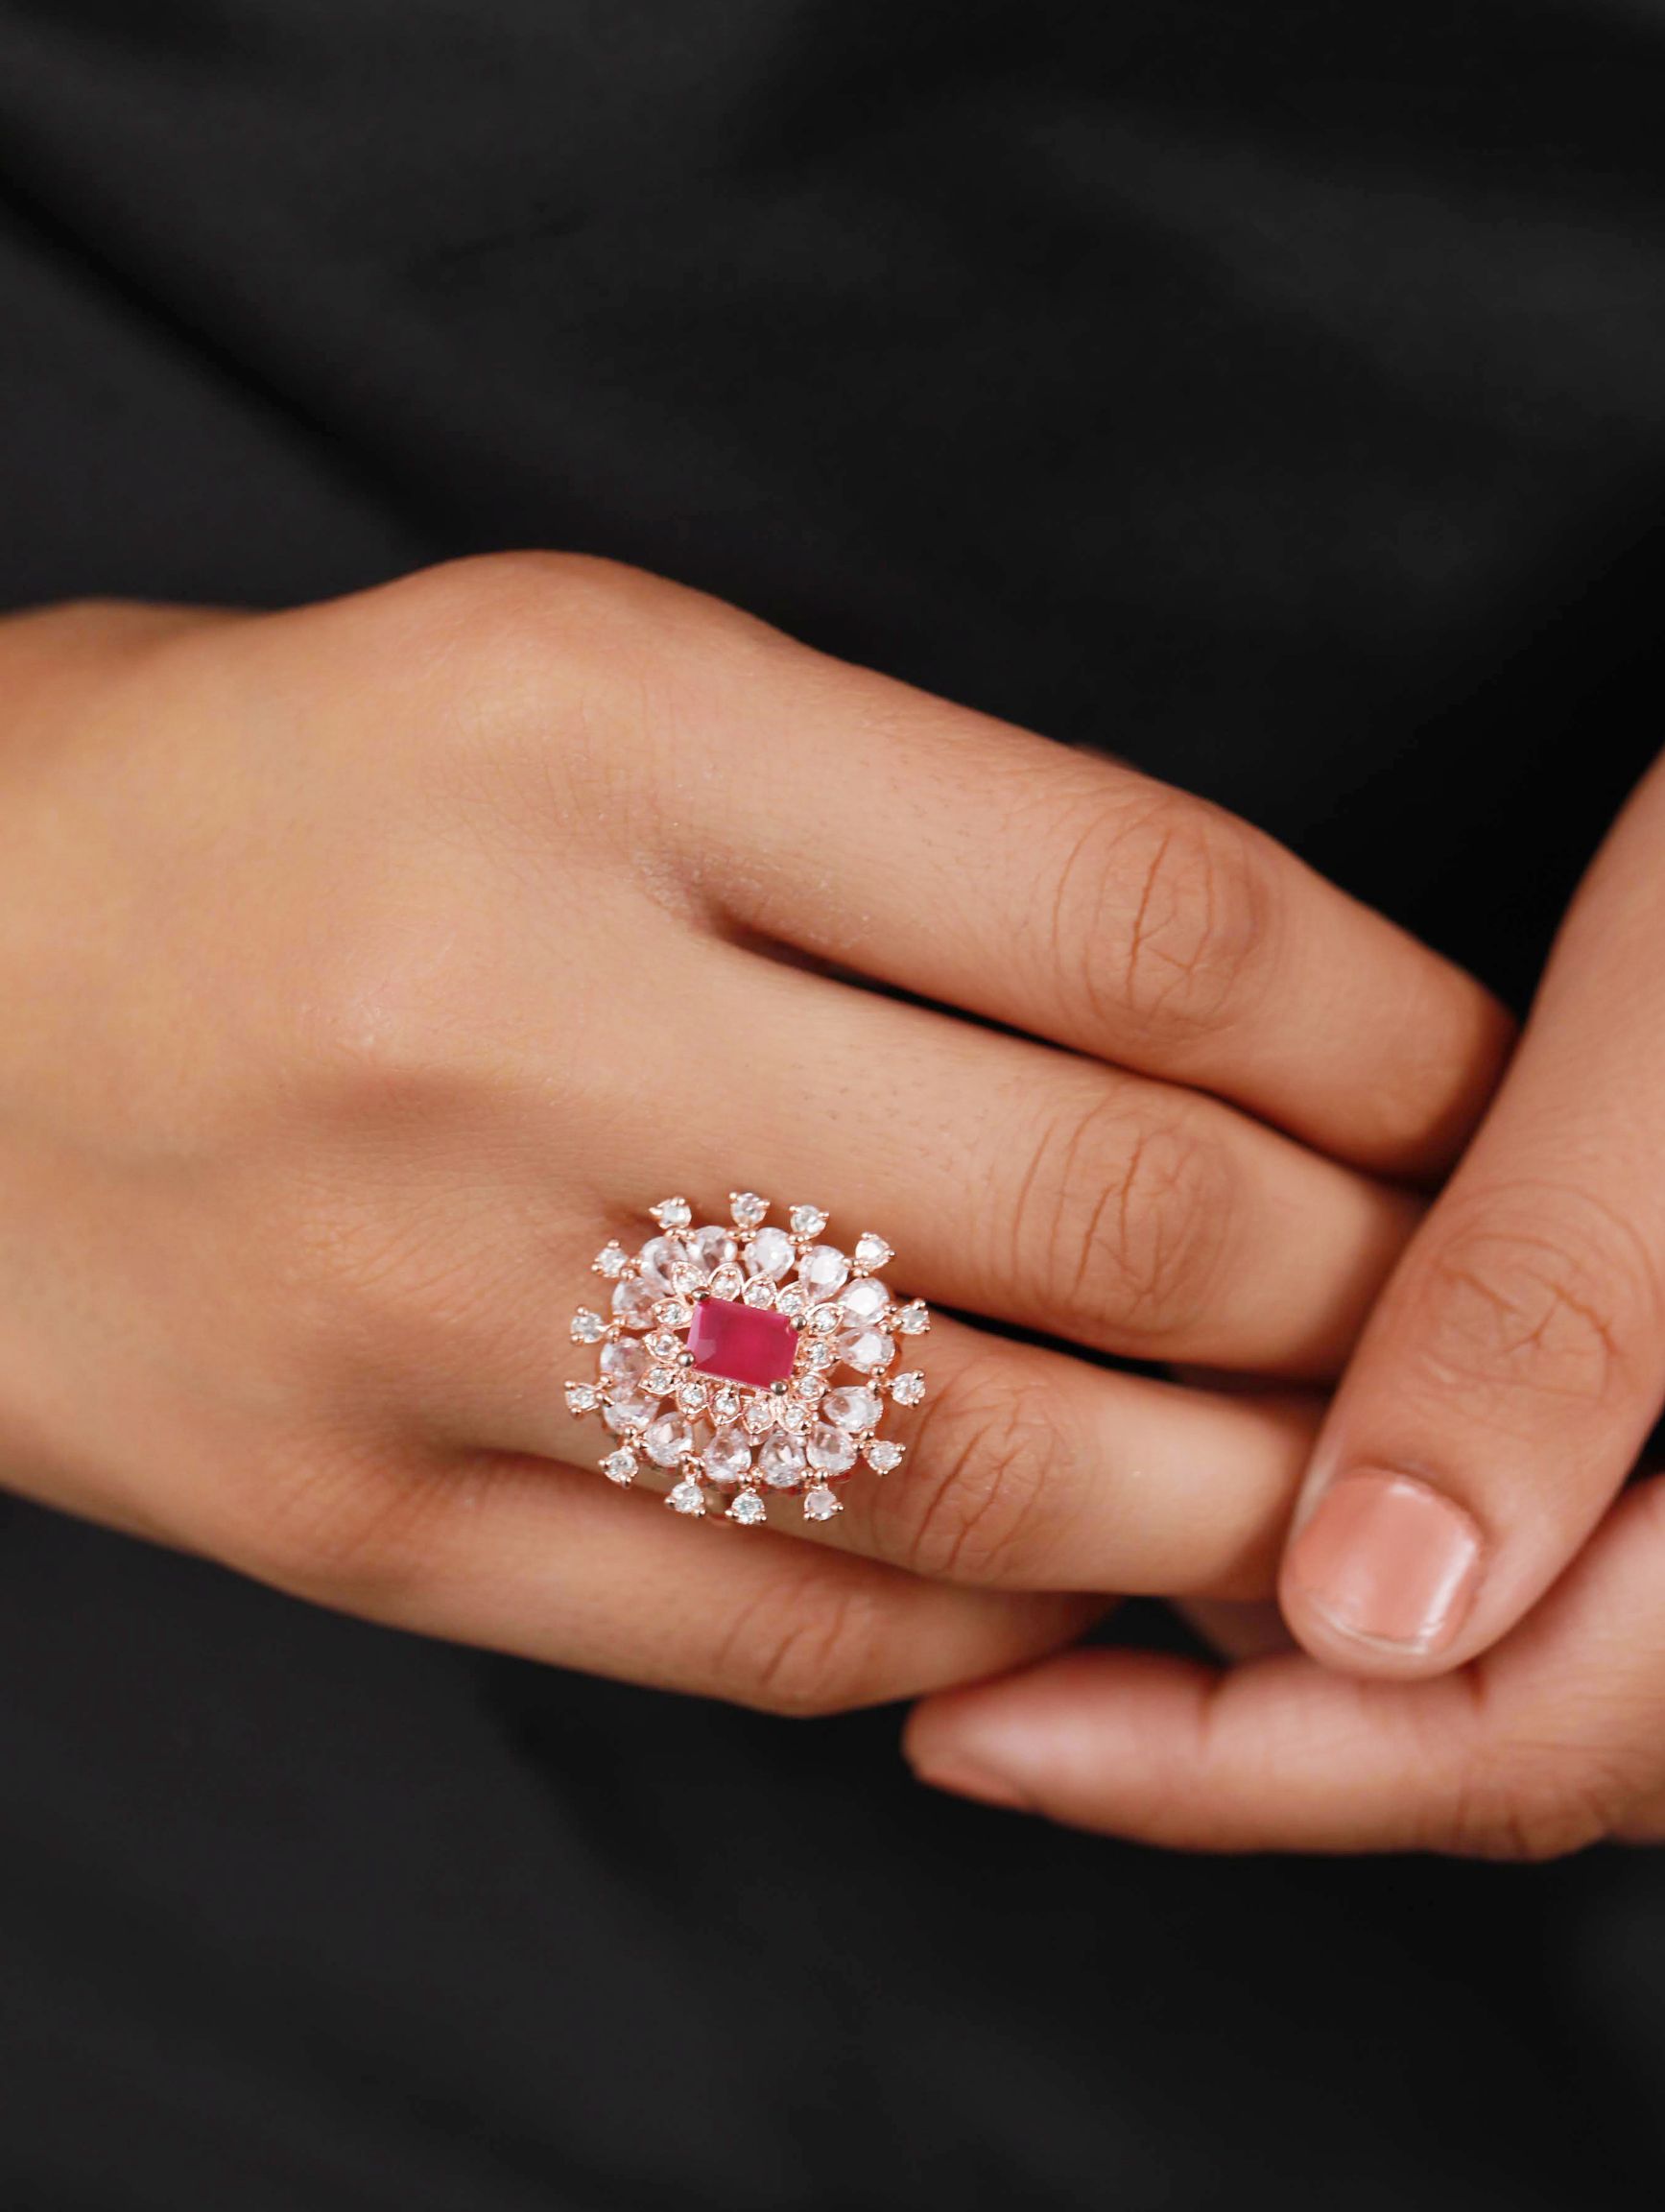 Rose Gold Plated & Pink American Diamond studded Cocktail Ring - Jazzandsizzle